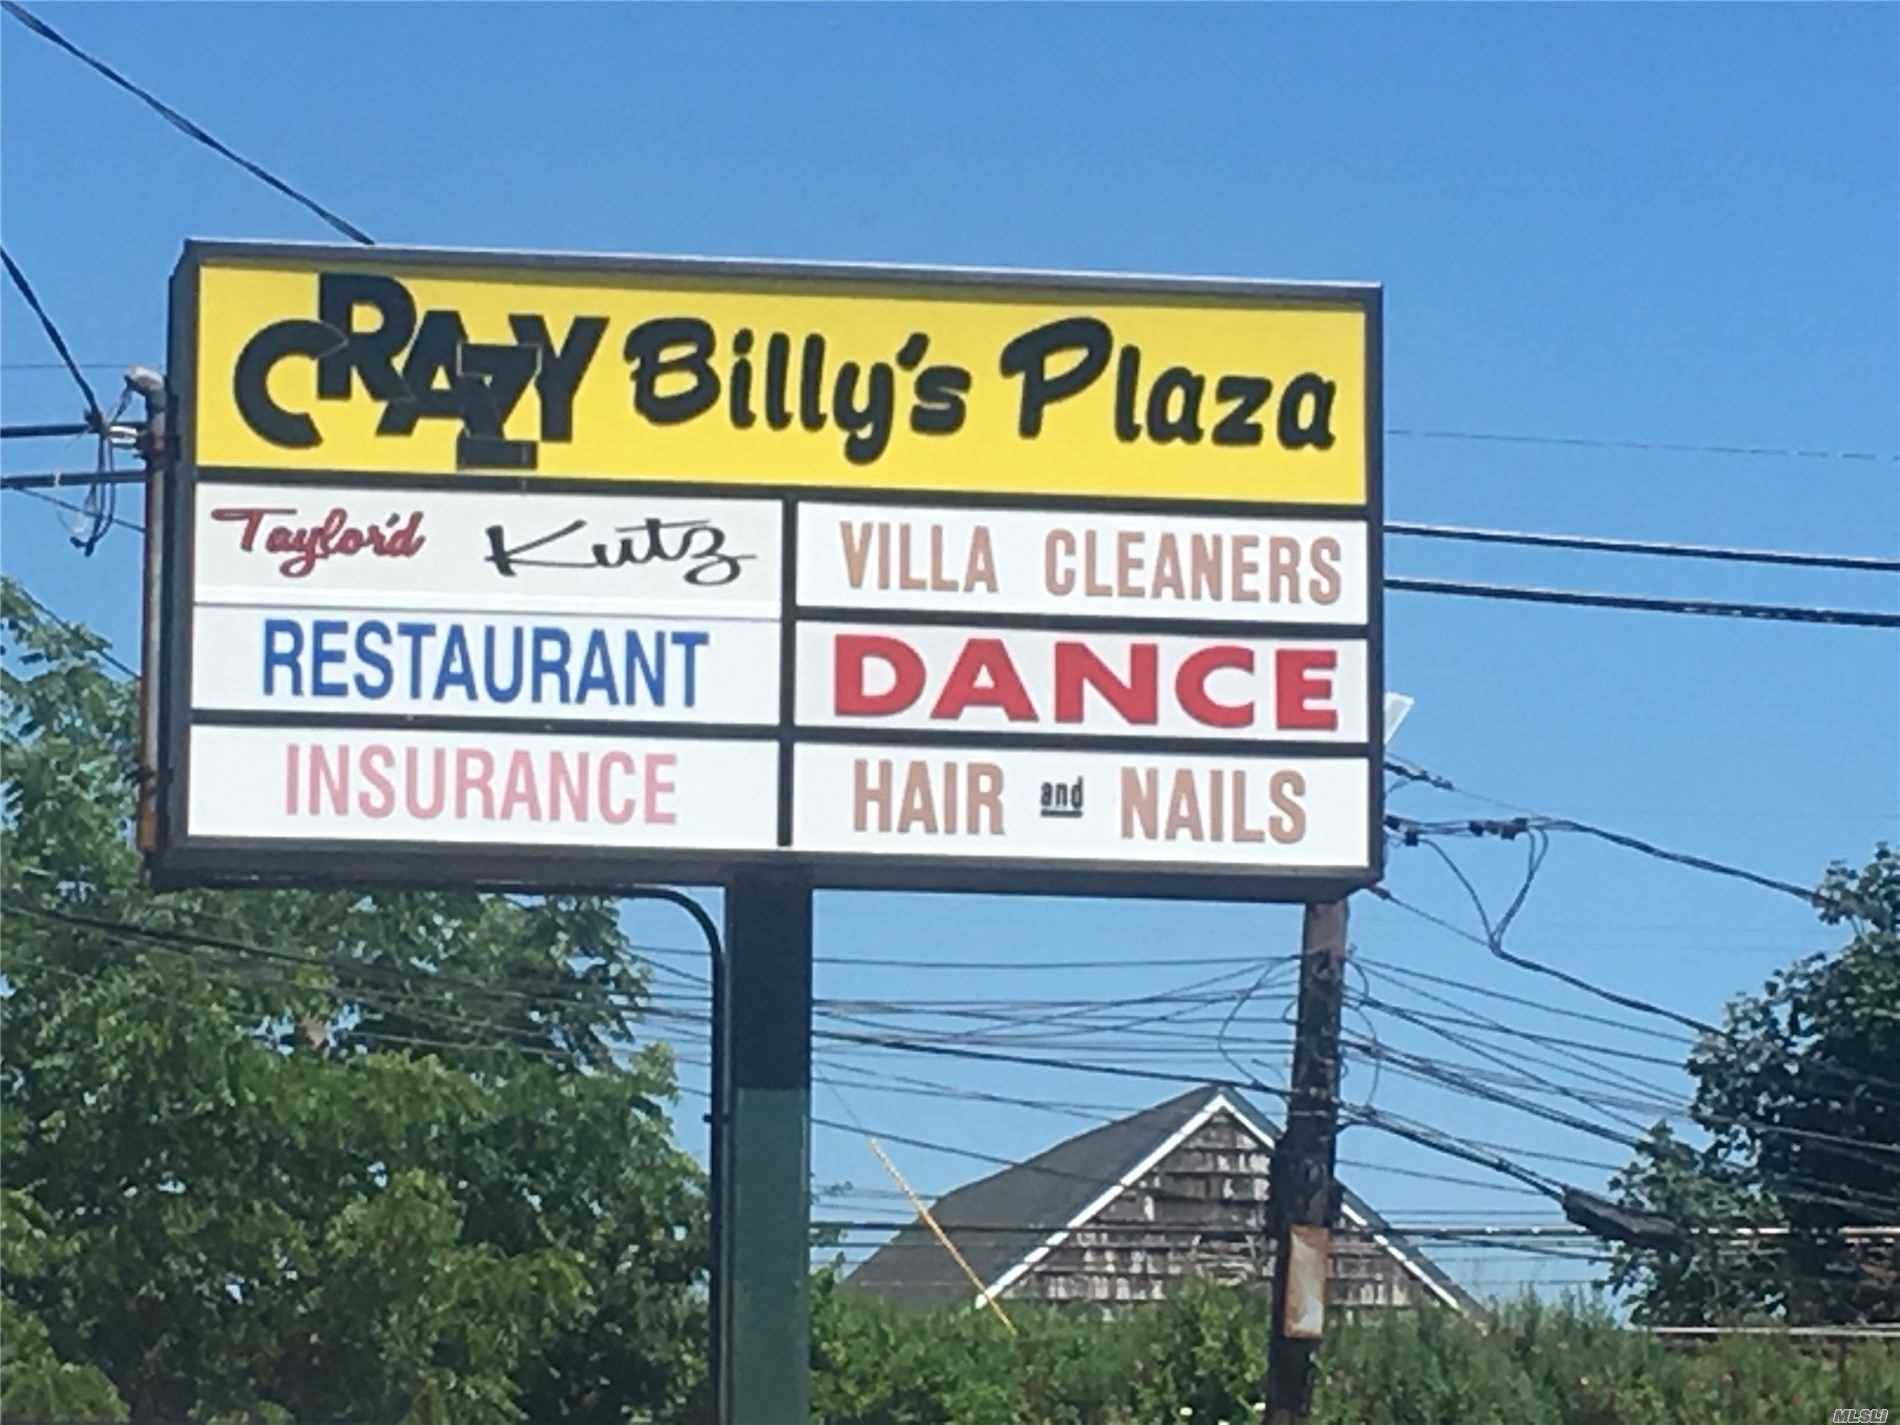 Iconic Crazy Billy's Shopping Center !